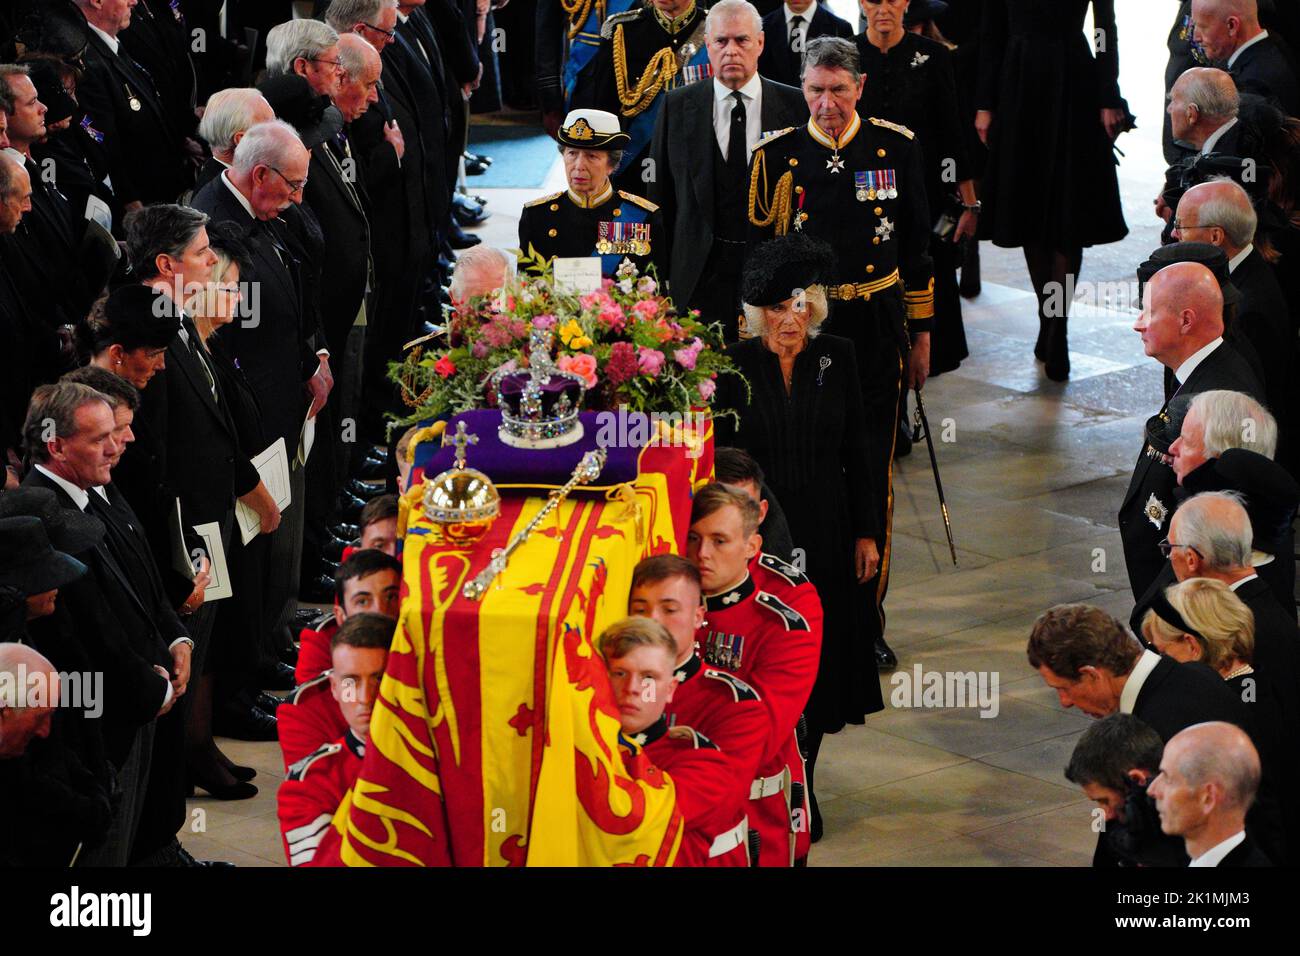 King Charles III (hidden), the Queen Consort, the Princess Royal, Vice Admiral Sir Timothy Laurence and the Duke of York walk behind the coffin at the Committal Service for Queen Elizabeth II held at St George's Chapel in Windsor Castle, Berkshire. Picture date: Monday September 19, 2022. Stock Photo